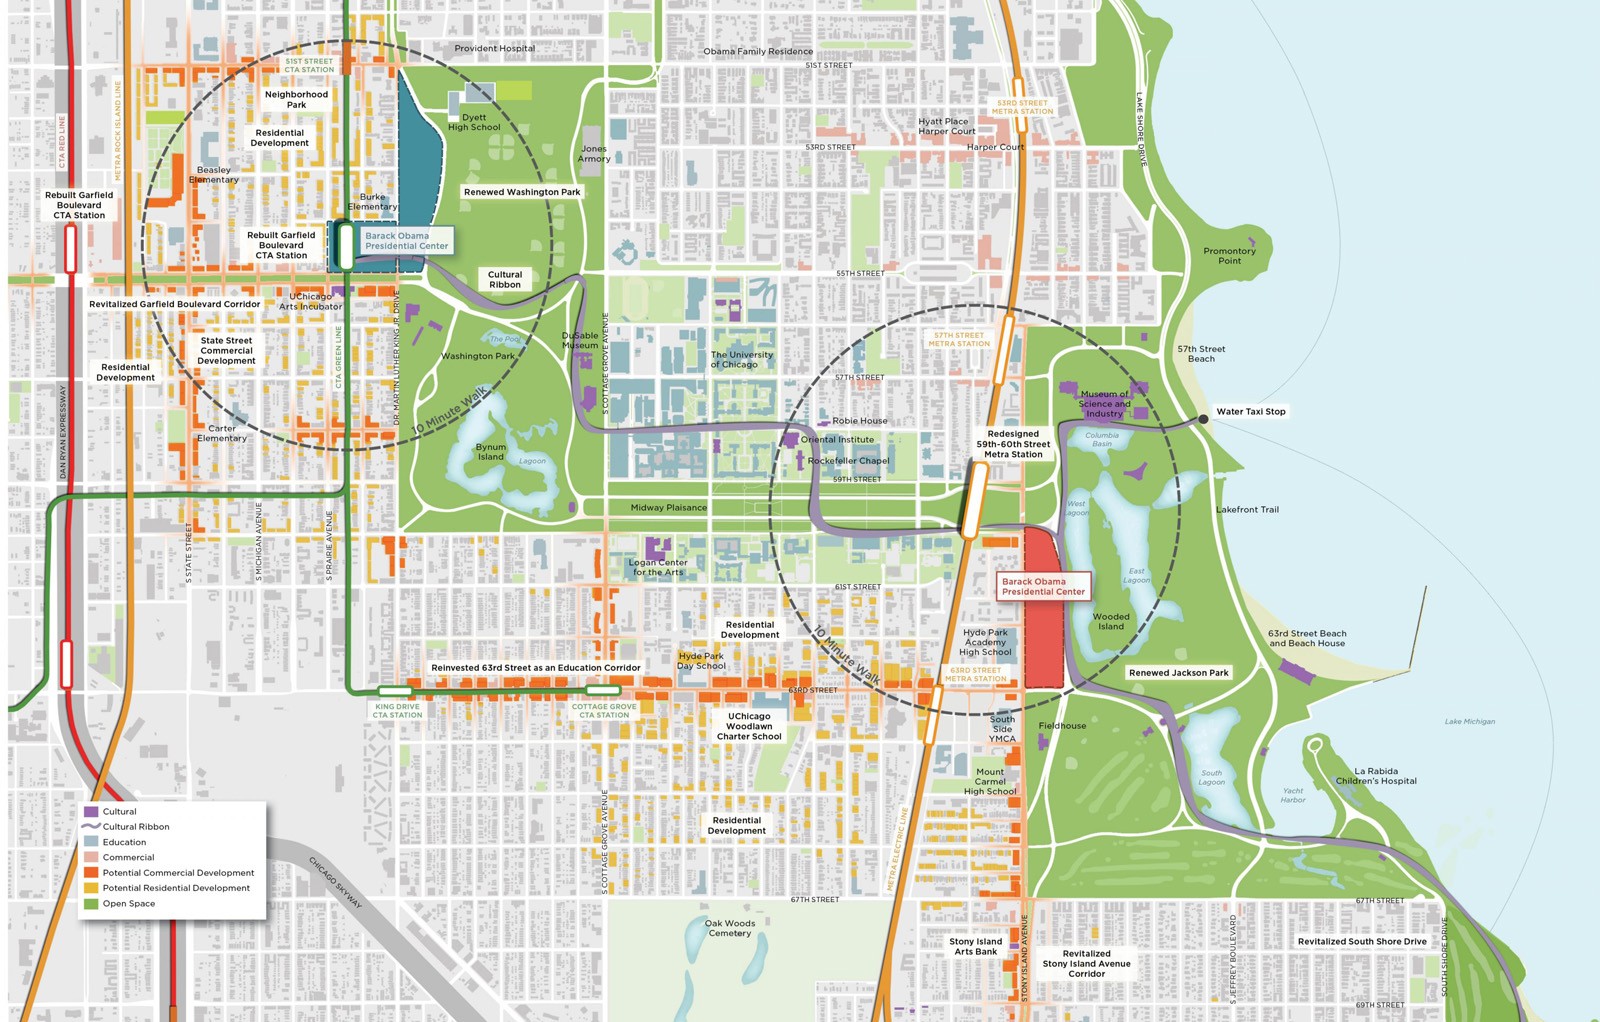 Two proposed sites for the Obama Presidential Library